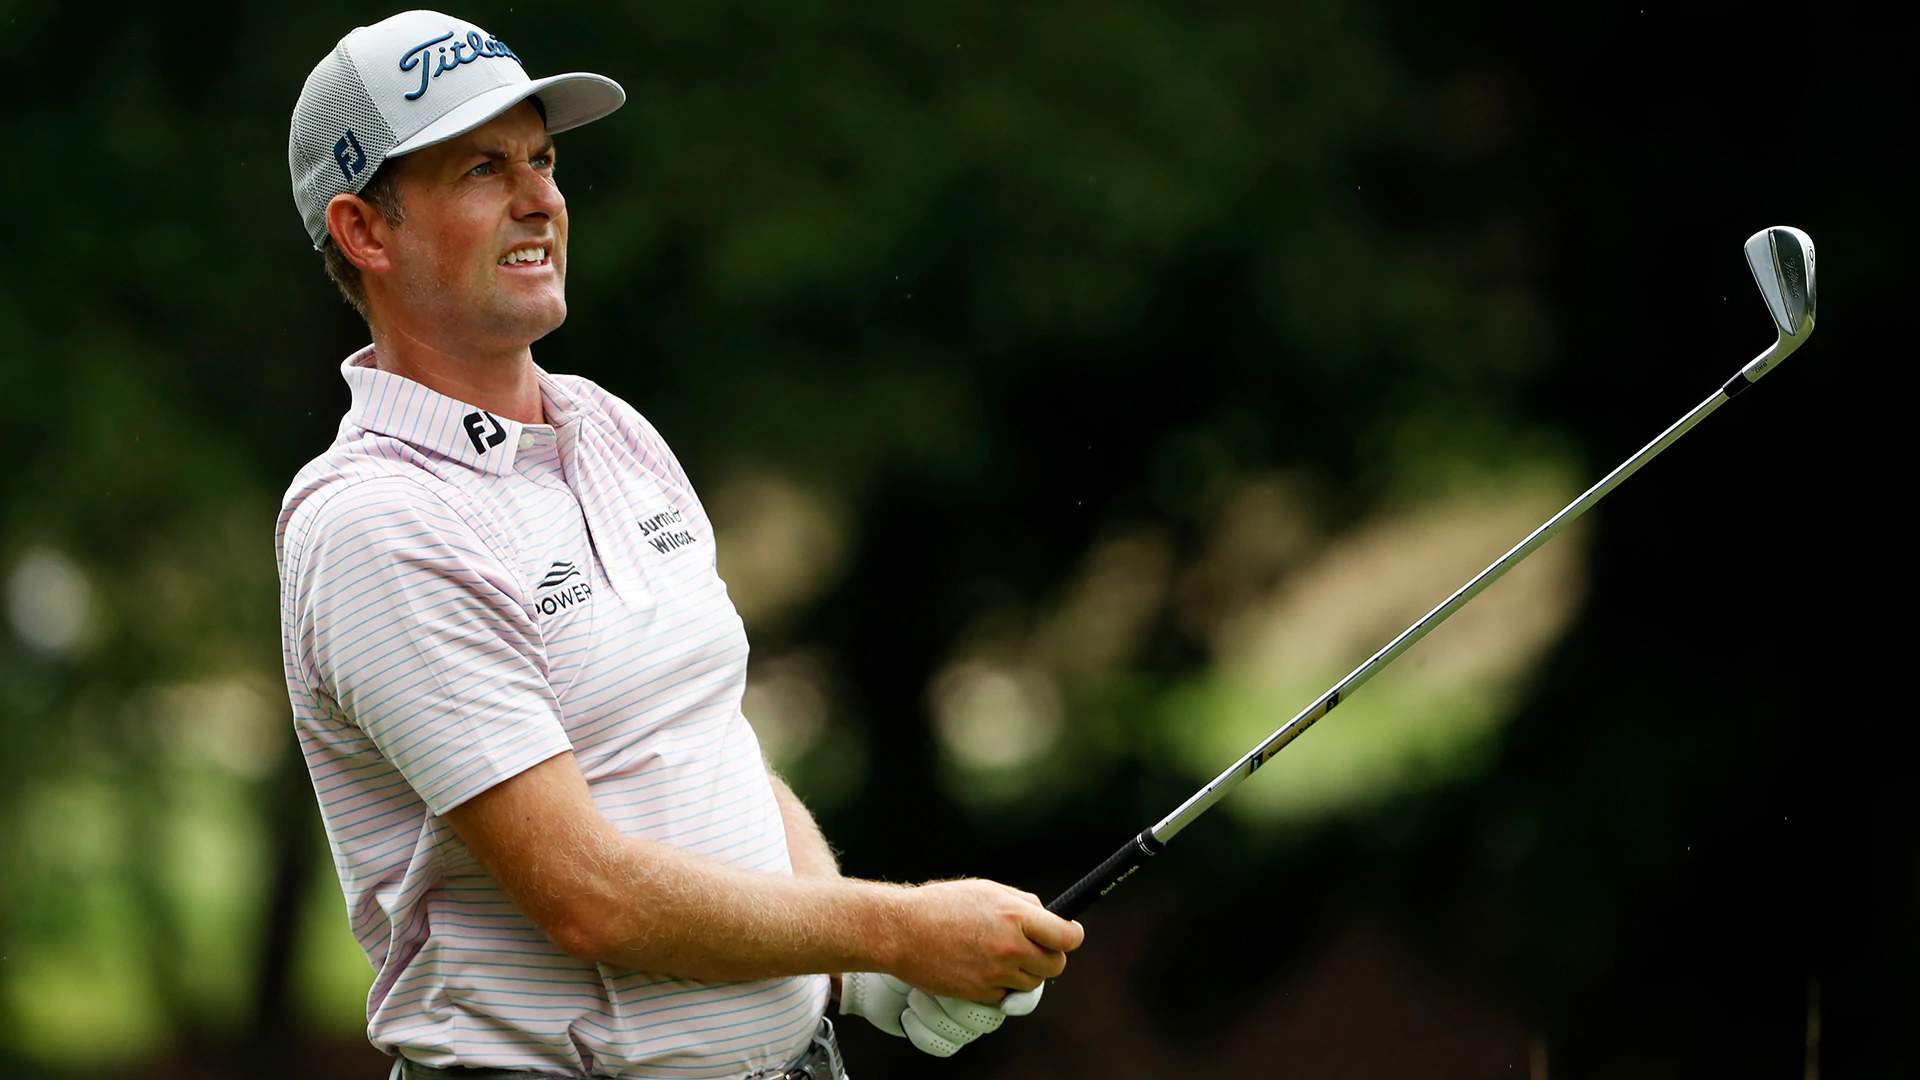 Webb Simpson frustrated despite playing ‘the best I’ve played in a long time’